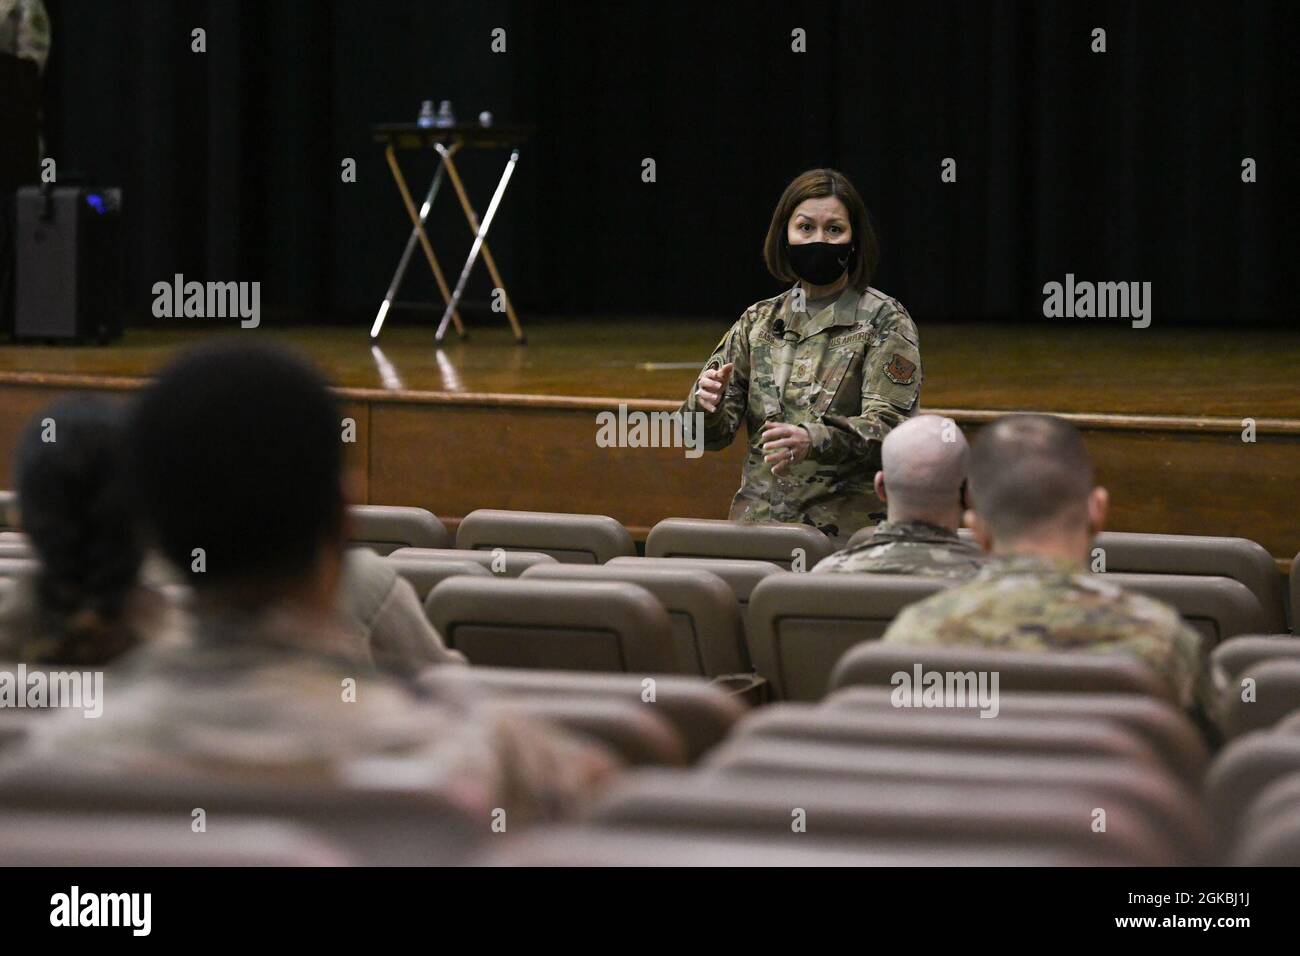 Chief Master Sgt. of the Air Force JoAnne Bass speaks to Joint Base Andrews Airmen at the Andrews Theater on JBA, Md. March 4, 2021. Bass spoke about her past as a young Airman and delved into topics such as resiliency and learning from mistakes. Stock Photo